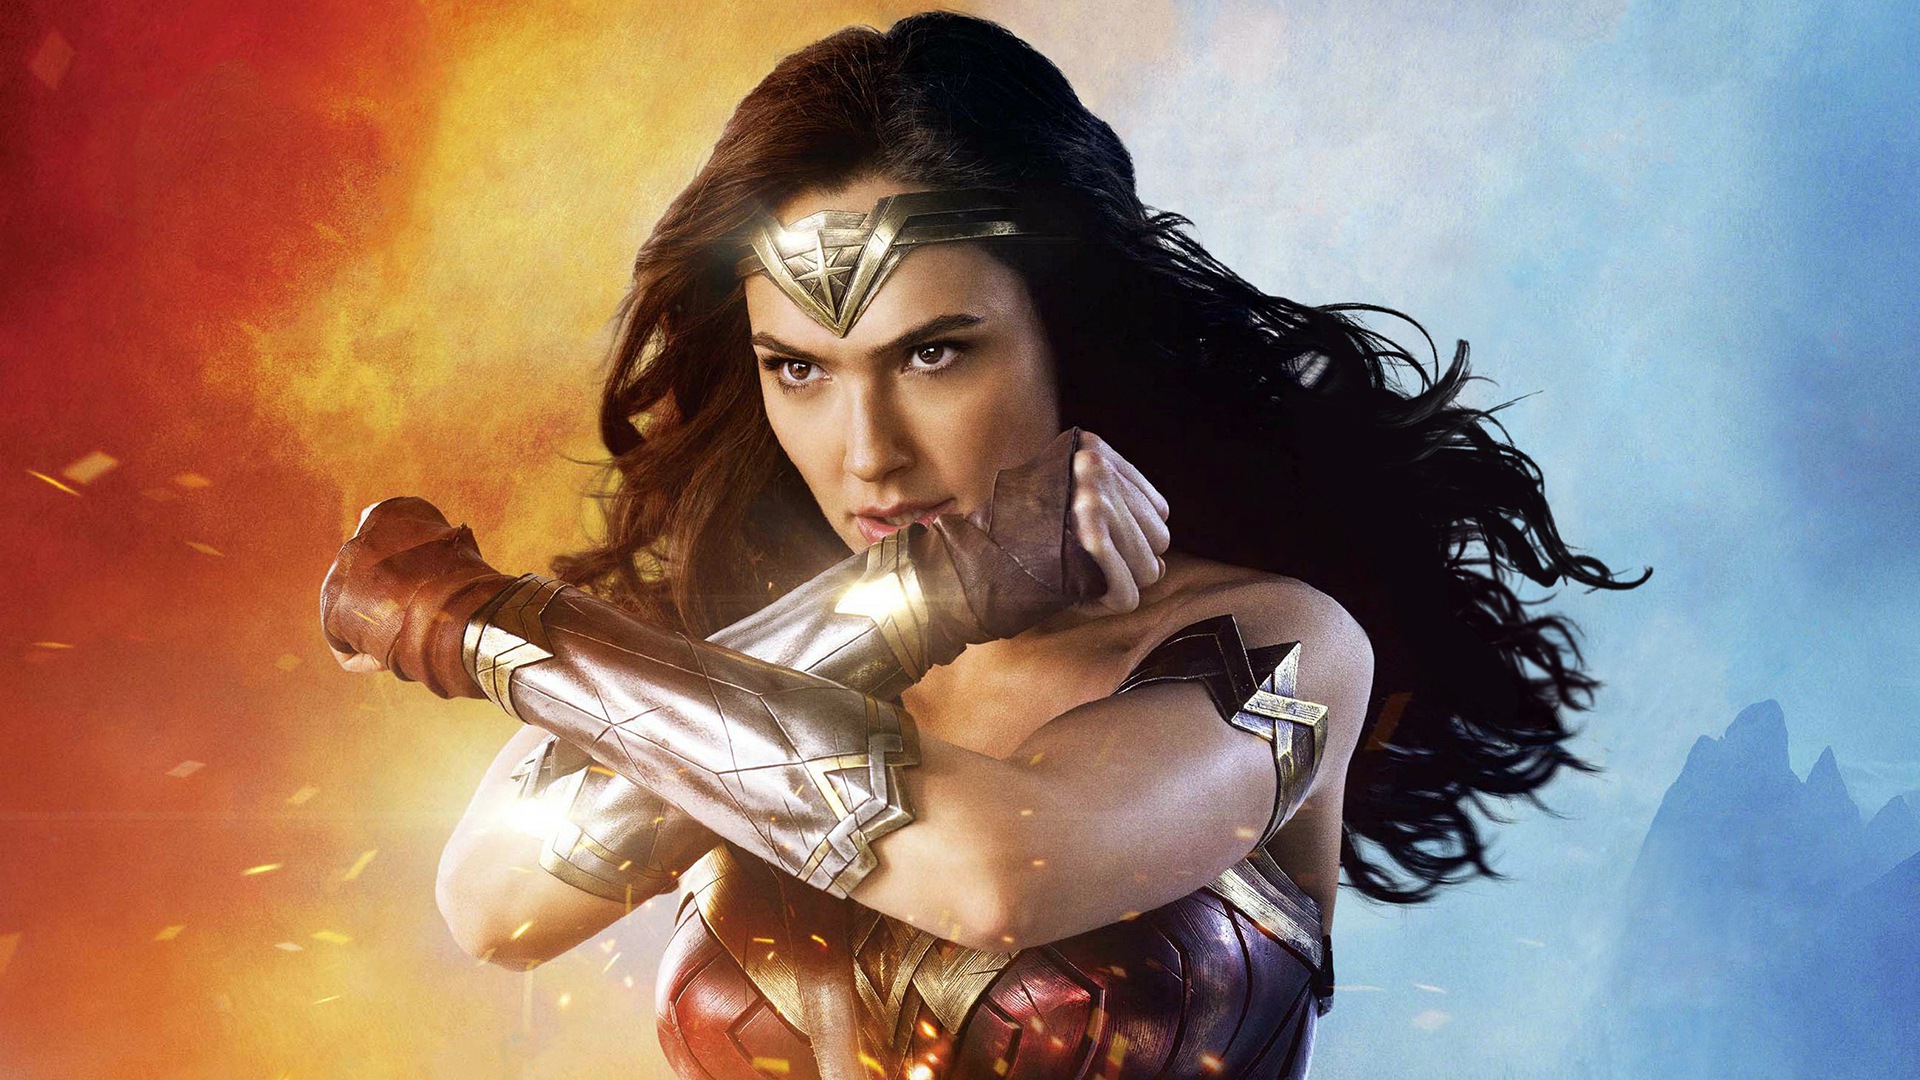 Wonder Woman crosses her arms for her iconic pose in the Wonder Woman 1984 promotional image